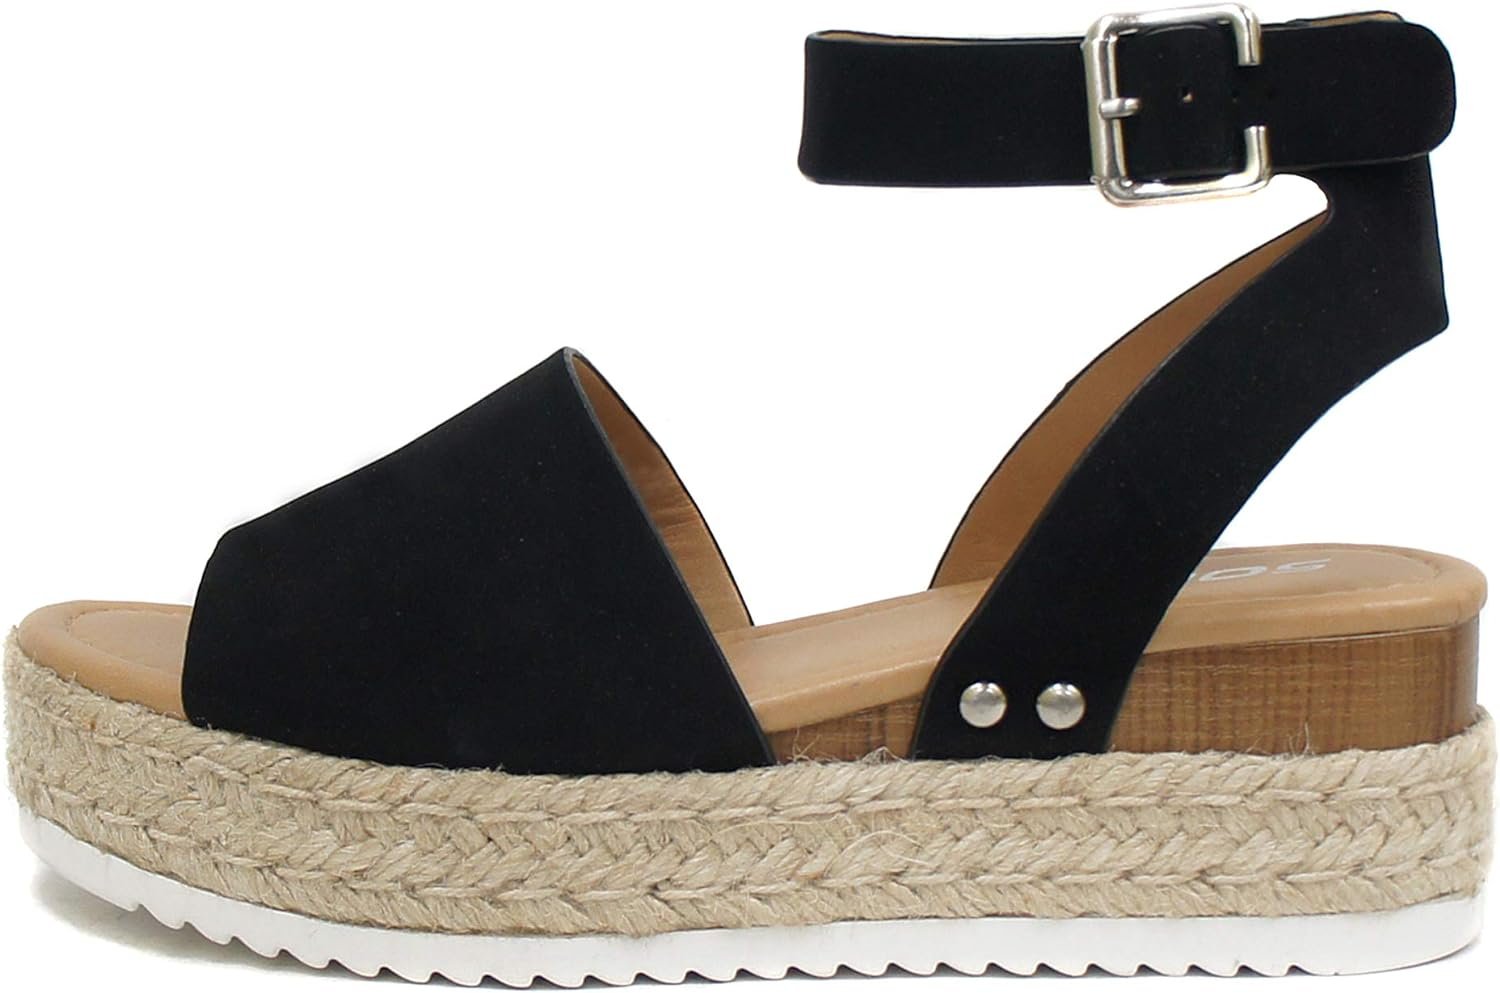 Soda Topic Open Toe Buckle Ankle Strap Espadrilles Flatform Wedge Casual Sandal Topic Black 7